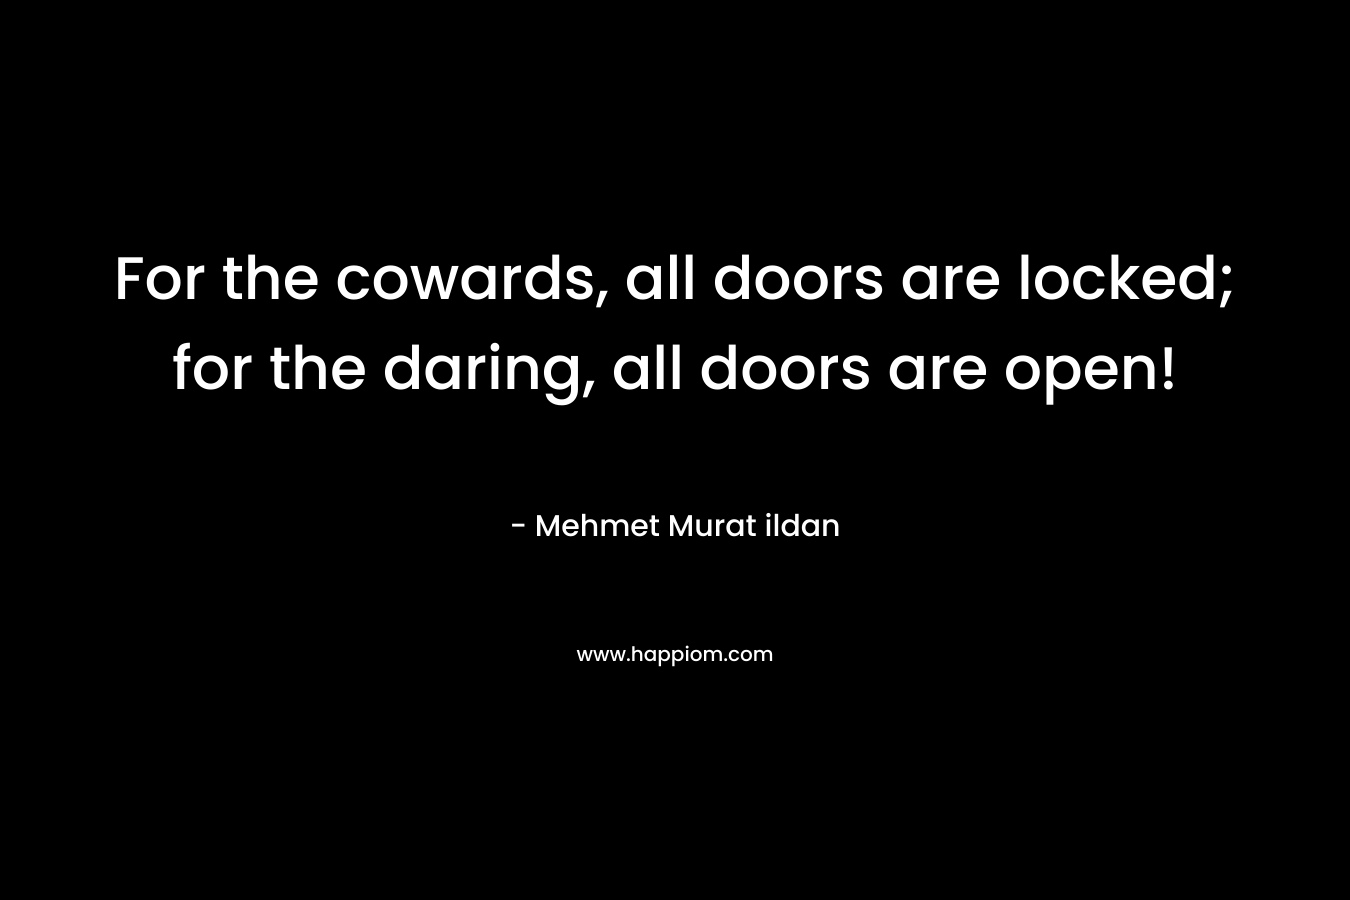 For the cowards, all doors are locked; for the daring, all doors are open!